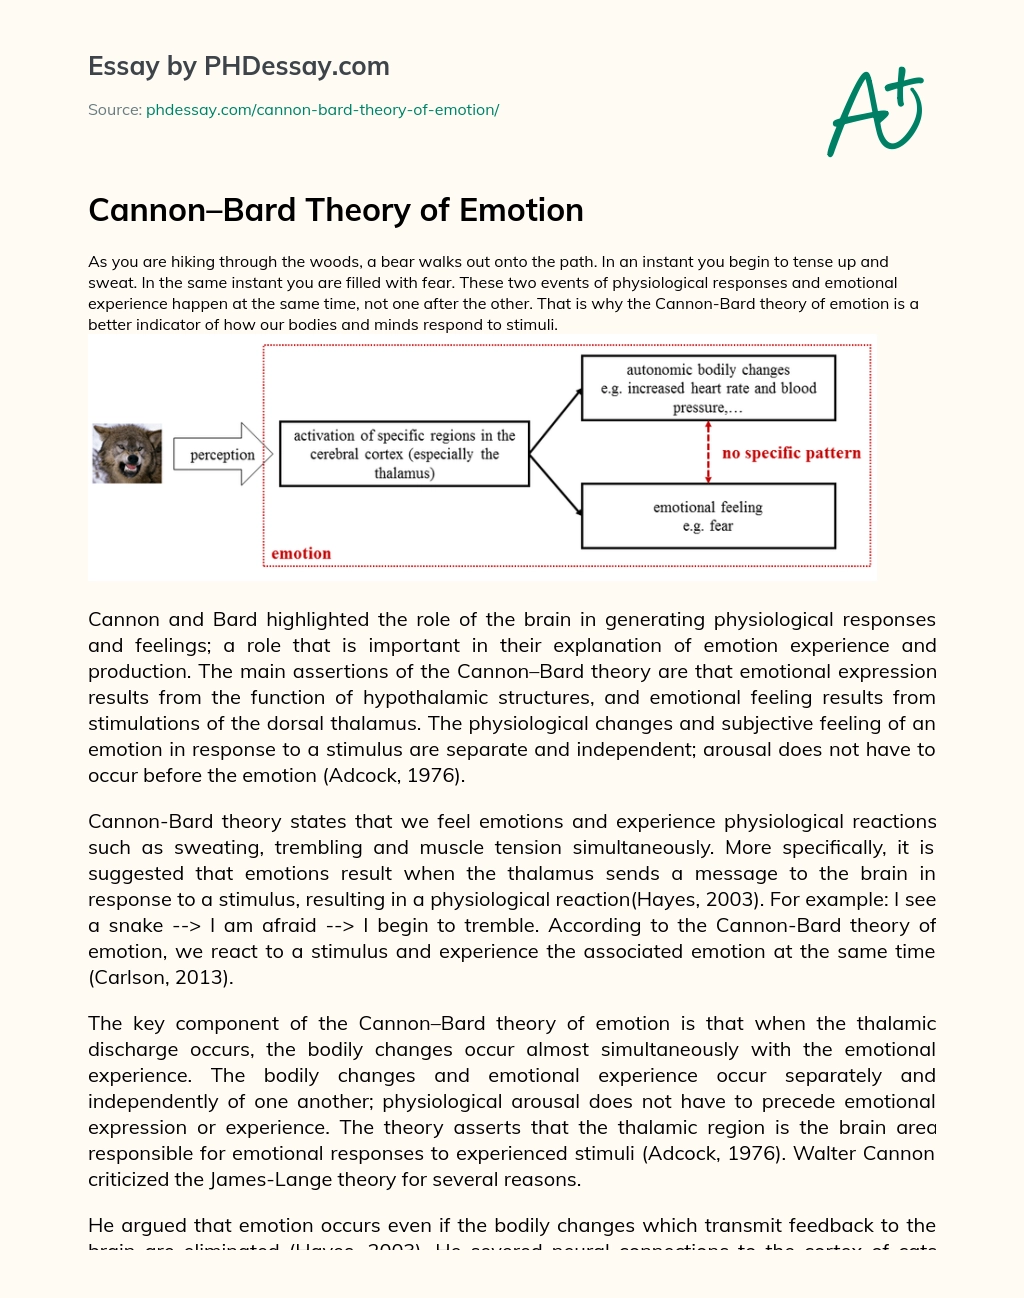 Cannon–Bard Theory of Emotion essay